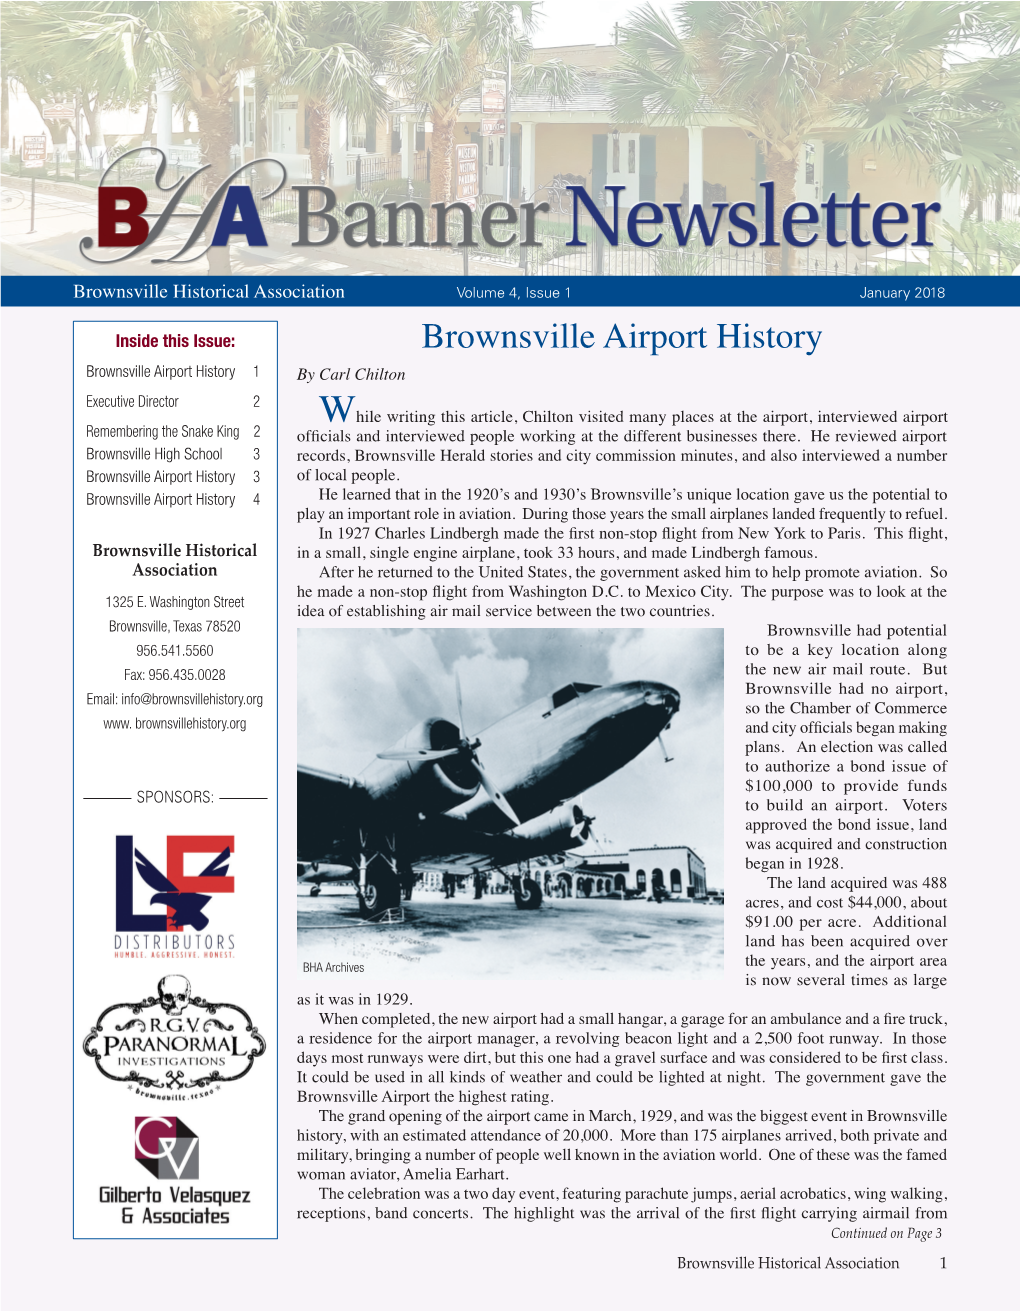 Brownsville Airport History